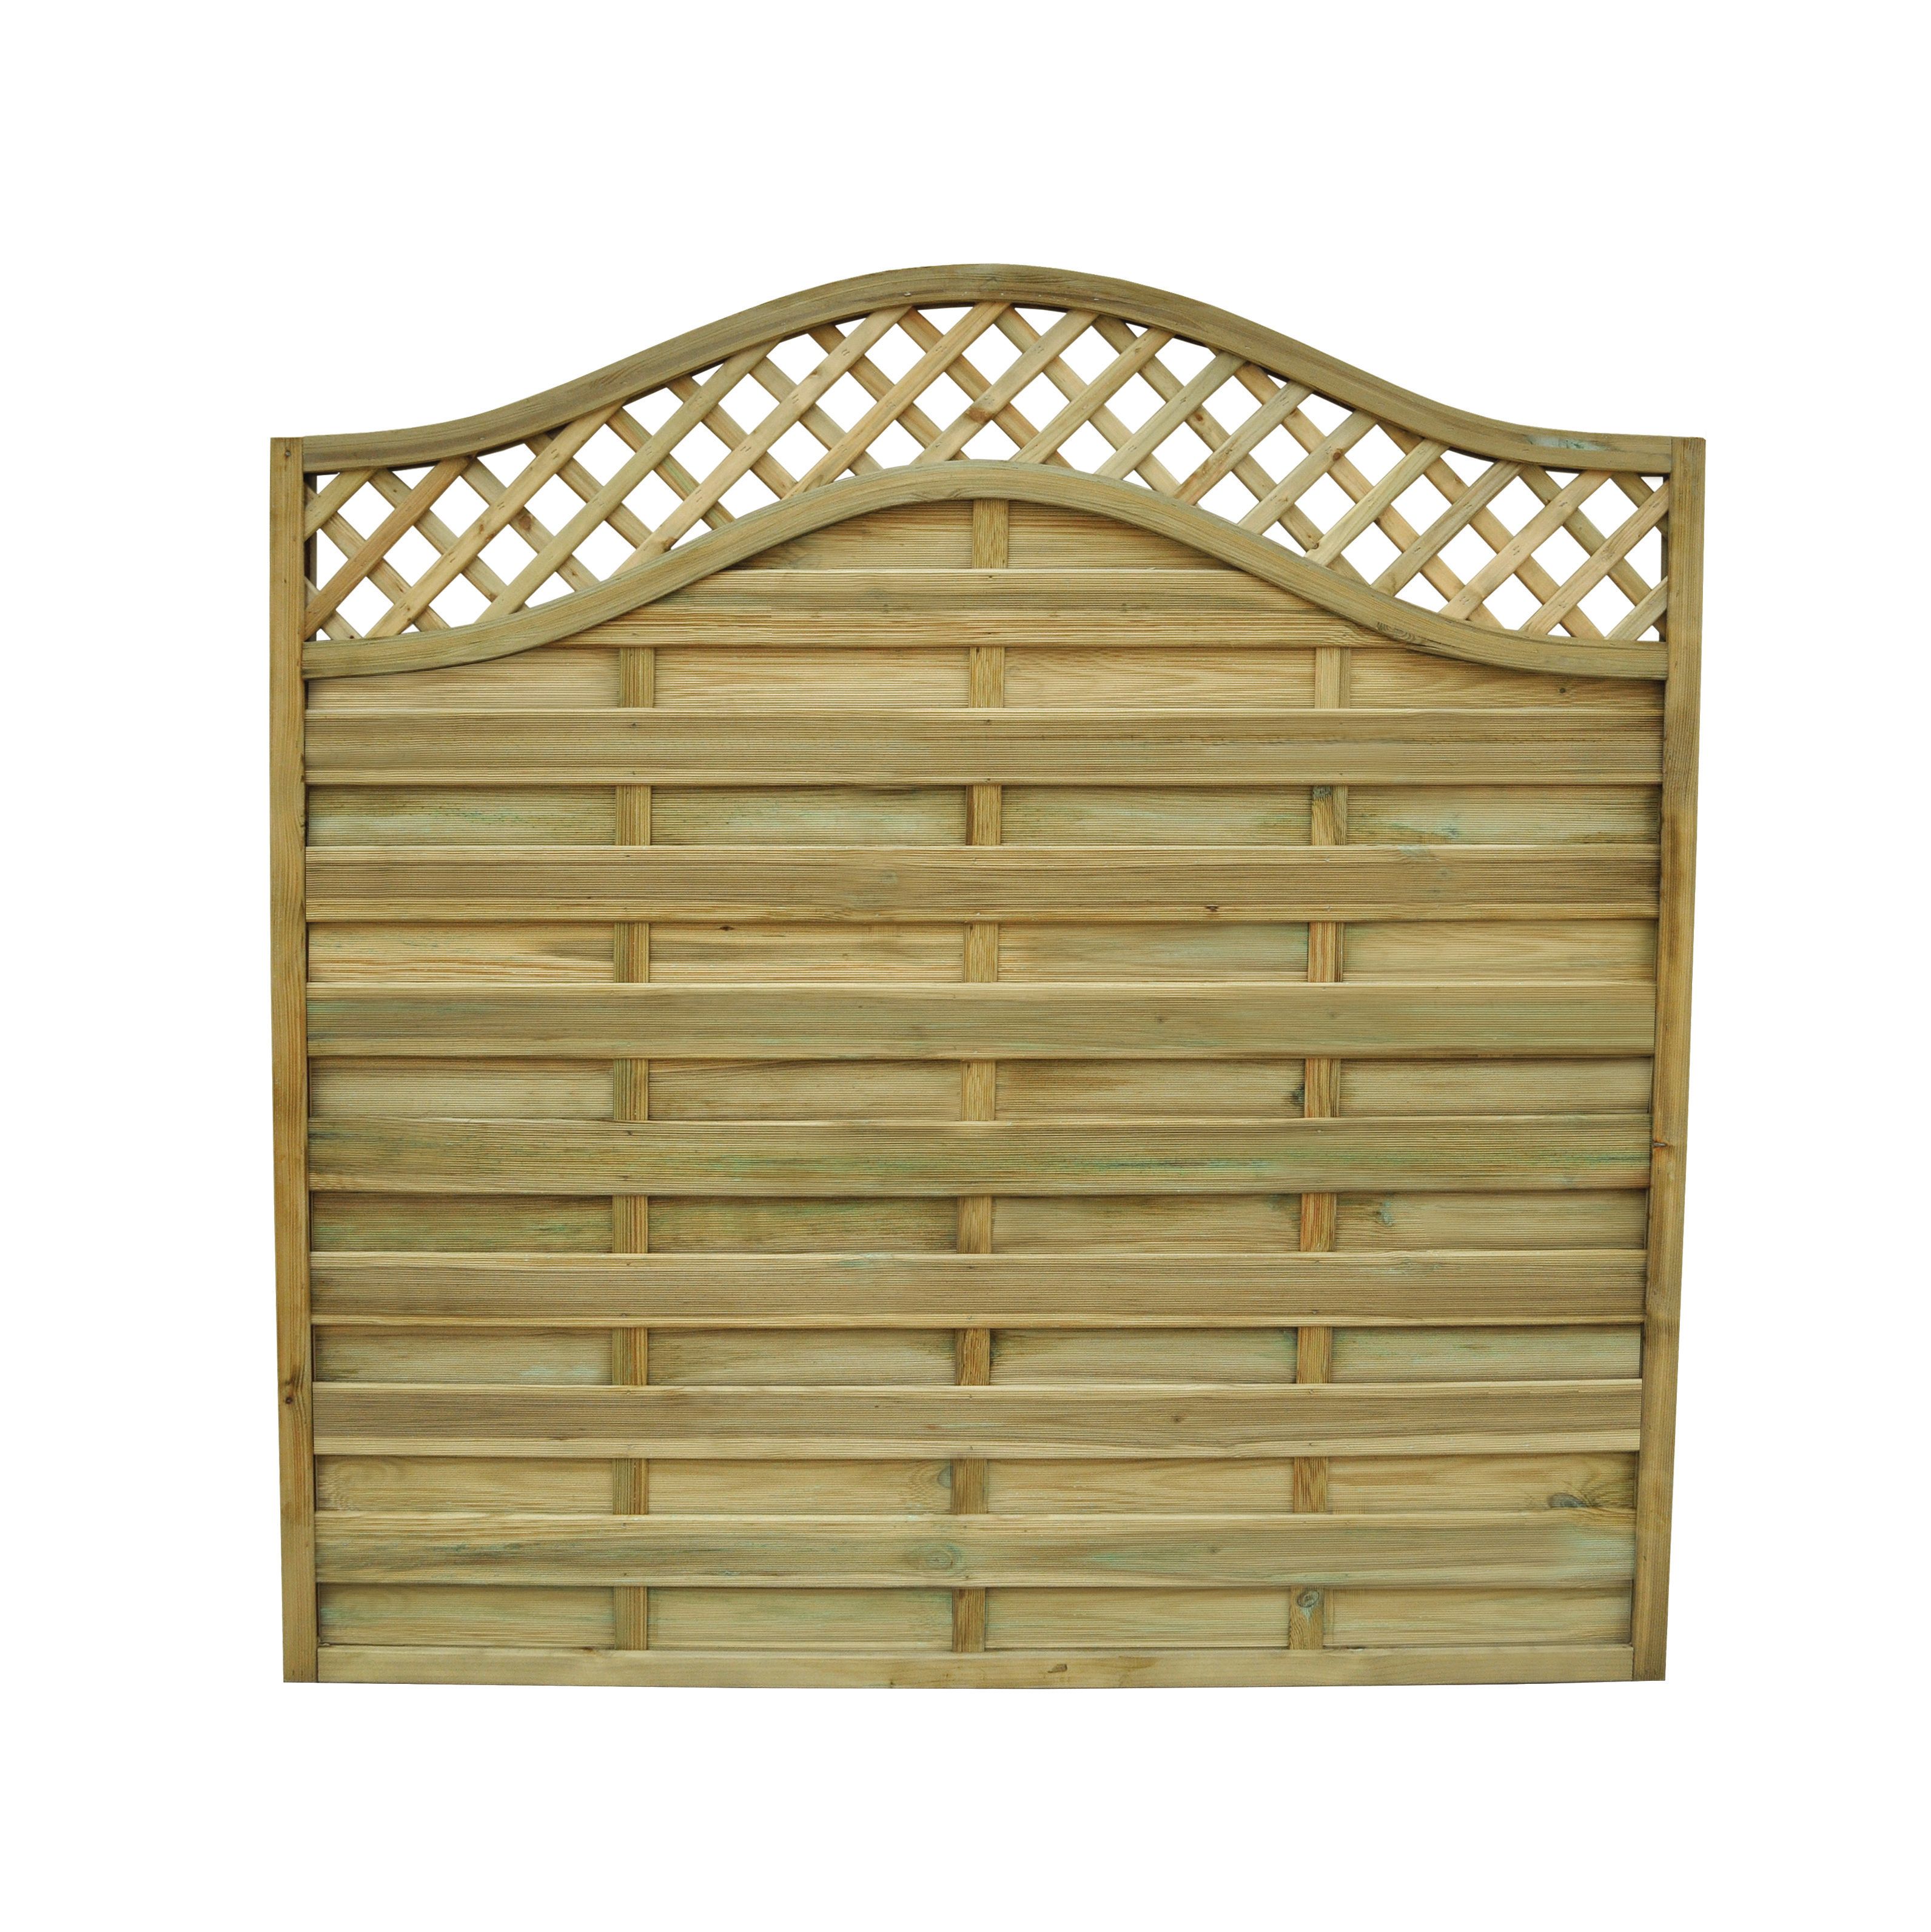 Image of Forest Garden Pressure Treated Bristol Fence Panel - 1800 x 1800mm - 6 x 6ft - Pack of 3